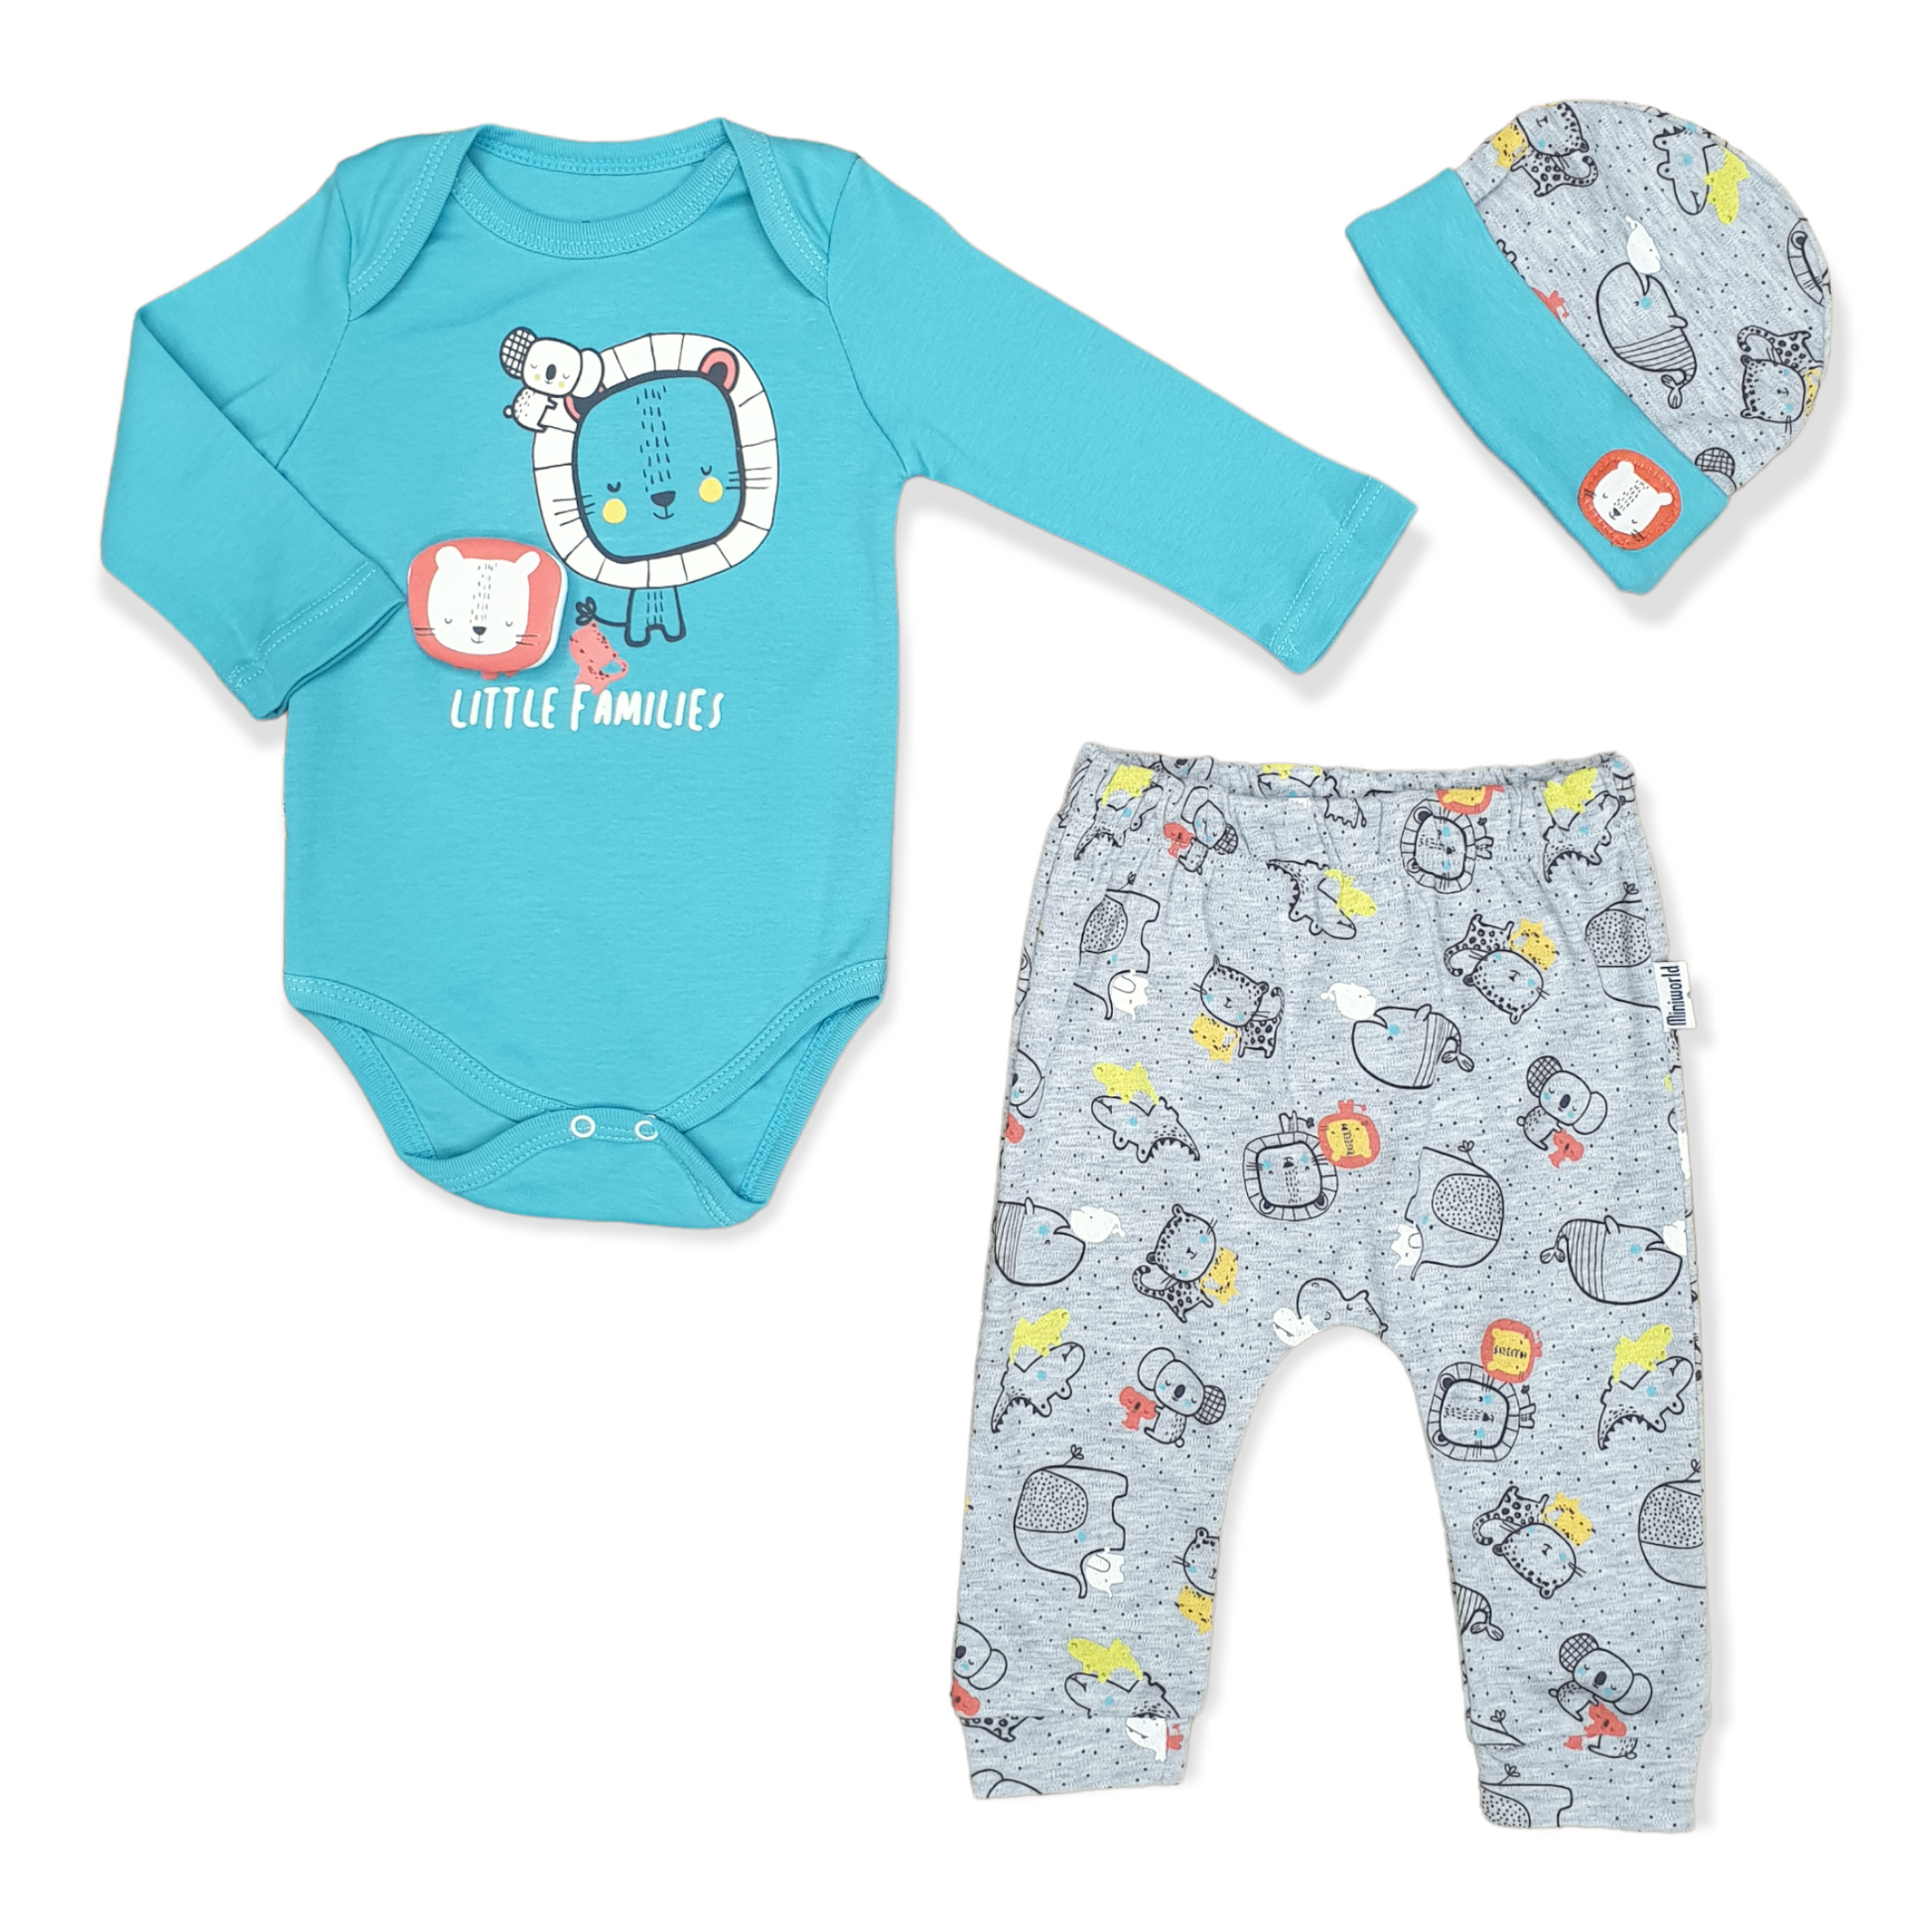 Blue Little Families Unisex Body with Pants and Cap-Animals, Blue, Body, Bodysuit, Boy, Cat, catboy, catgirl, catset3pcs, catunisex, Colors, Creeper, Families, Family, Footless, Girl, Grey, Lion, Long Sleeve, Onesie, Panda, Pants, Tiger, Unisex, Whale-Miniworld-[Too Twee]-[Tootwee]-[baby]-[newborn]-[clothes]-[essentials]-[toys]-[Lebanon]